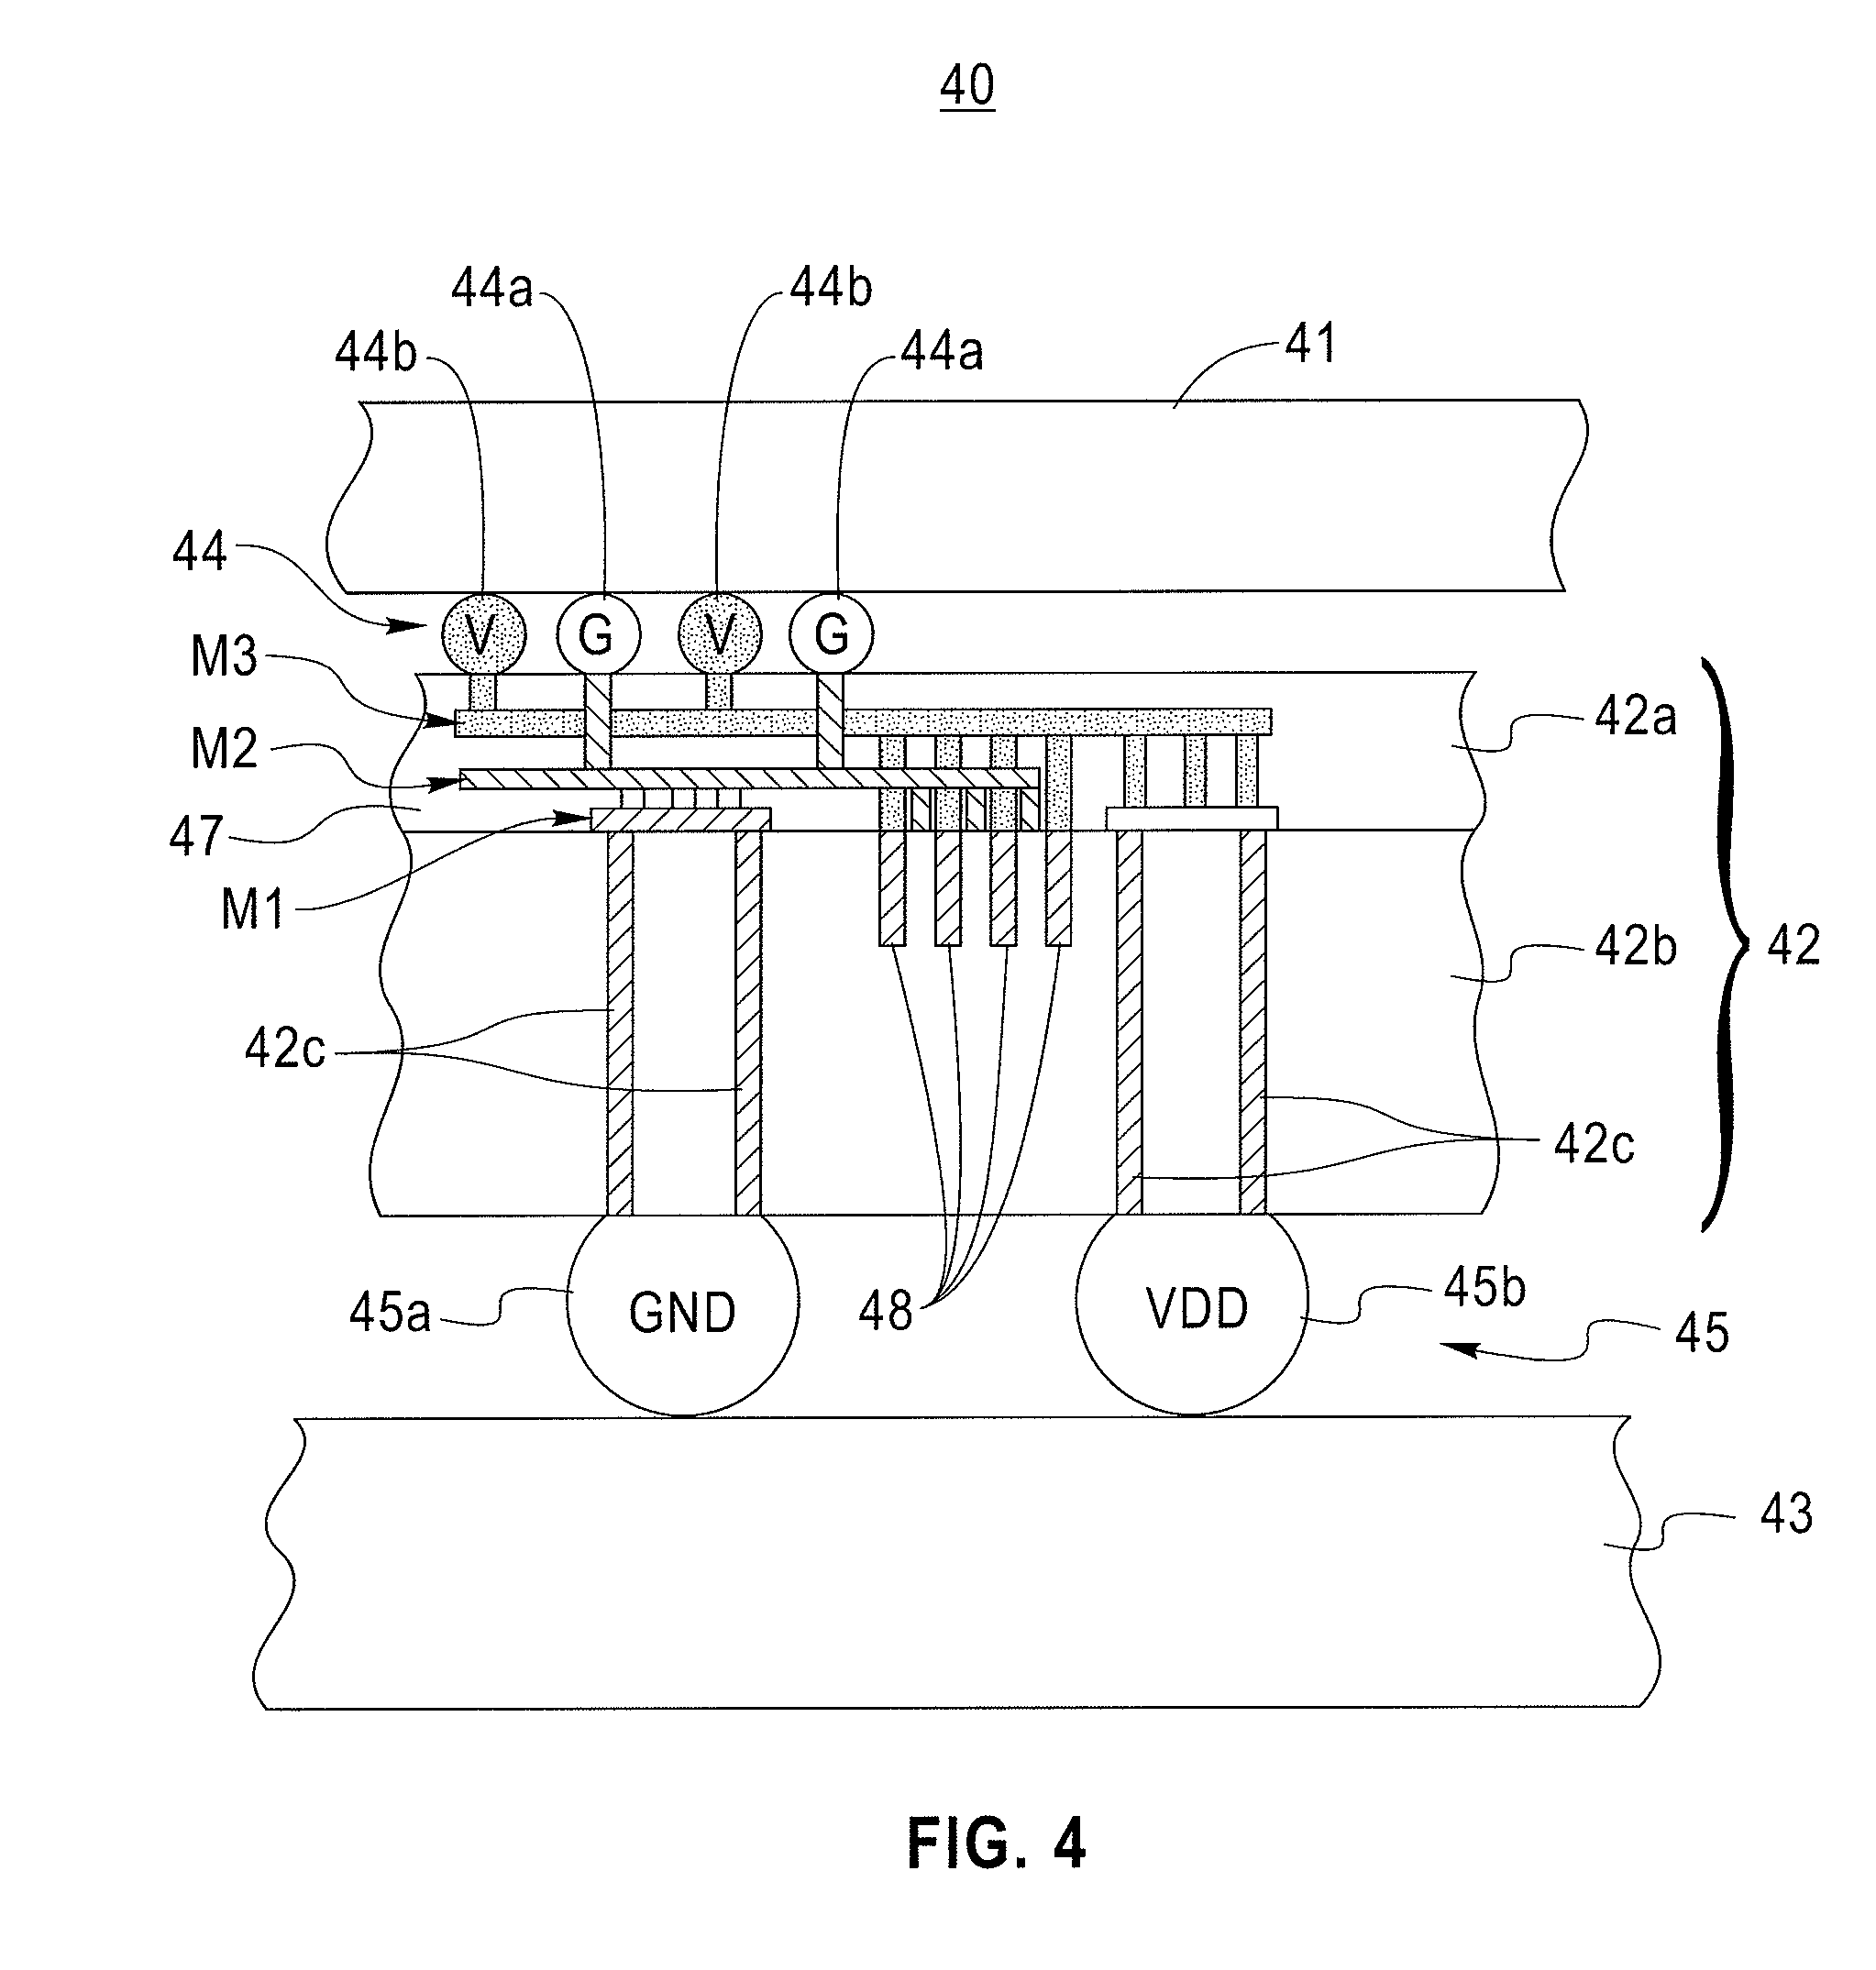 Apparatus and Methods for Constructing Semiconductor Chip Packages with Silicon Space Transformer Carriers